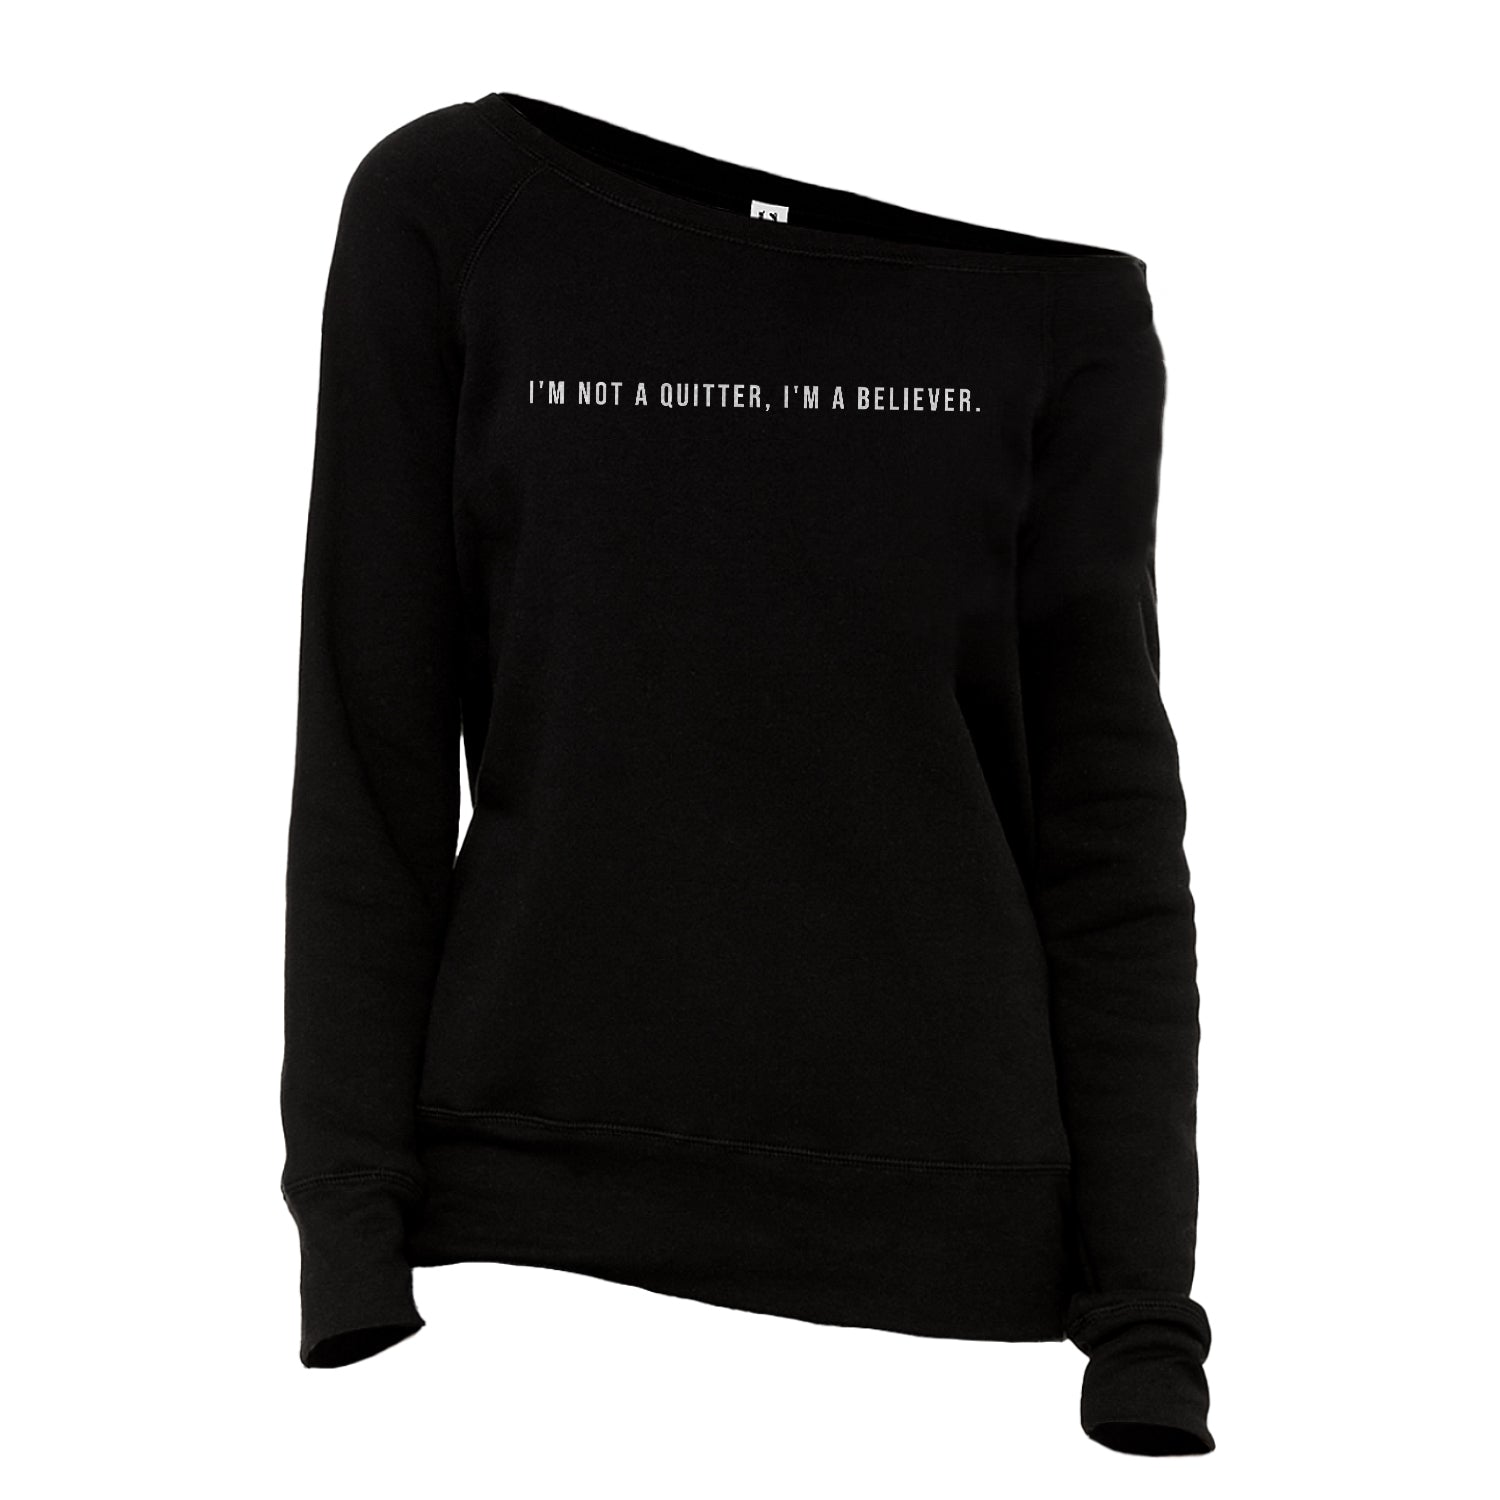 I'm Not a Quitter, I'm a Believer Slouchy Fleece Solid Black Image